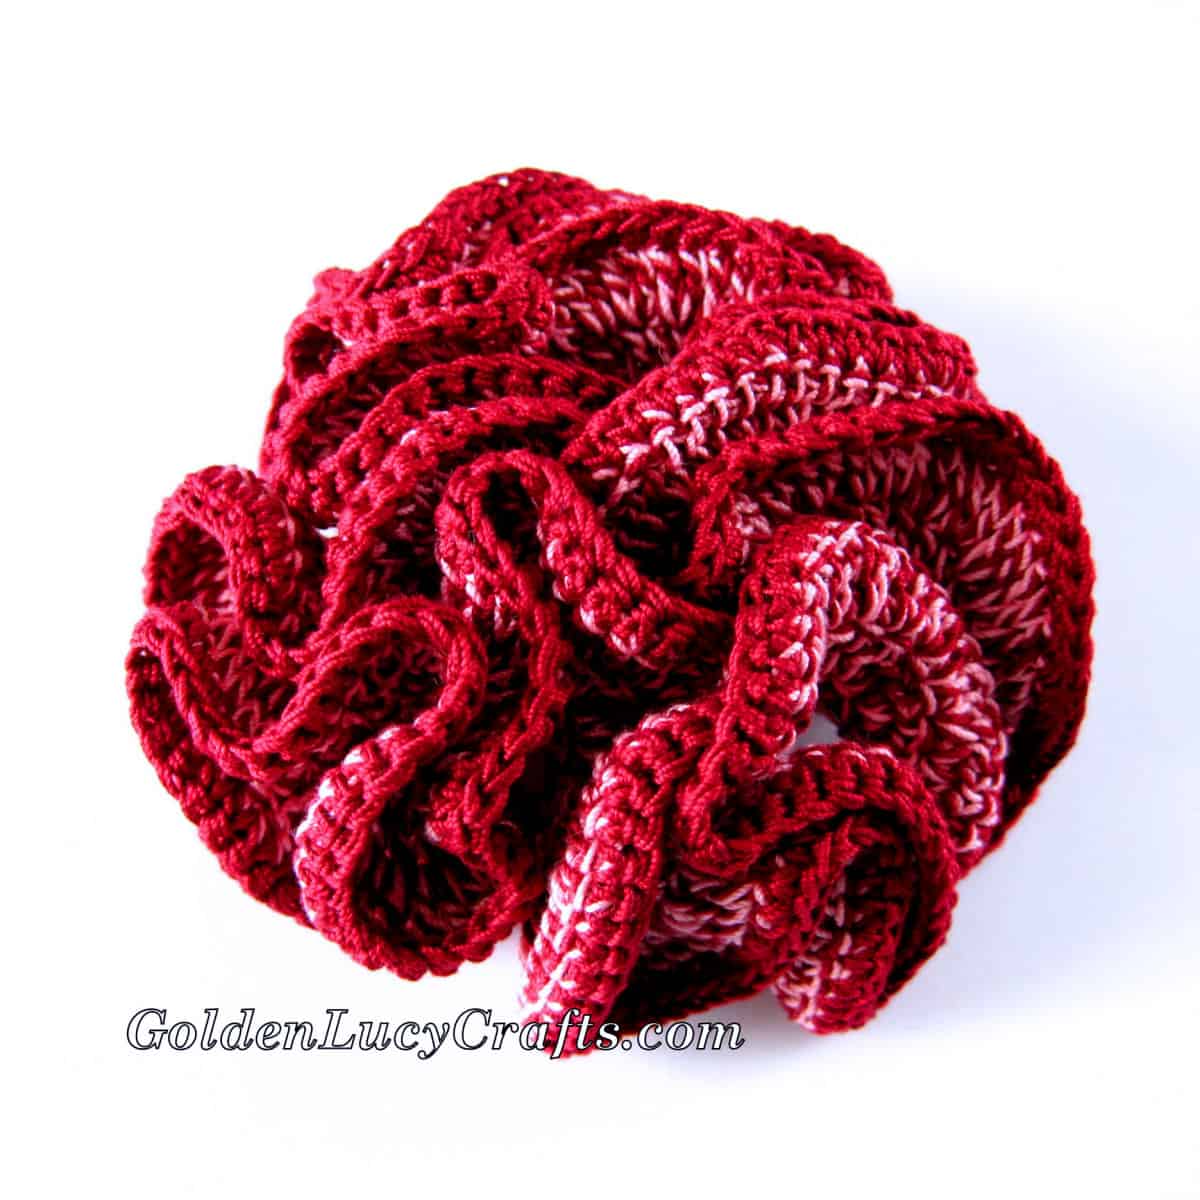 Crochet hyperbolic coral in dark red and pink colors.